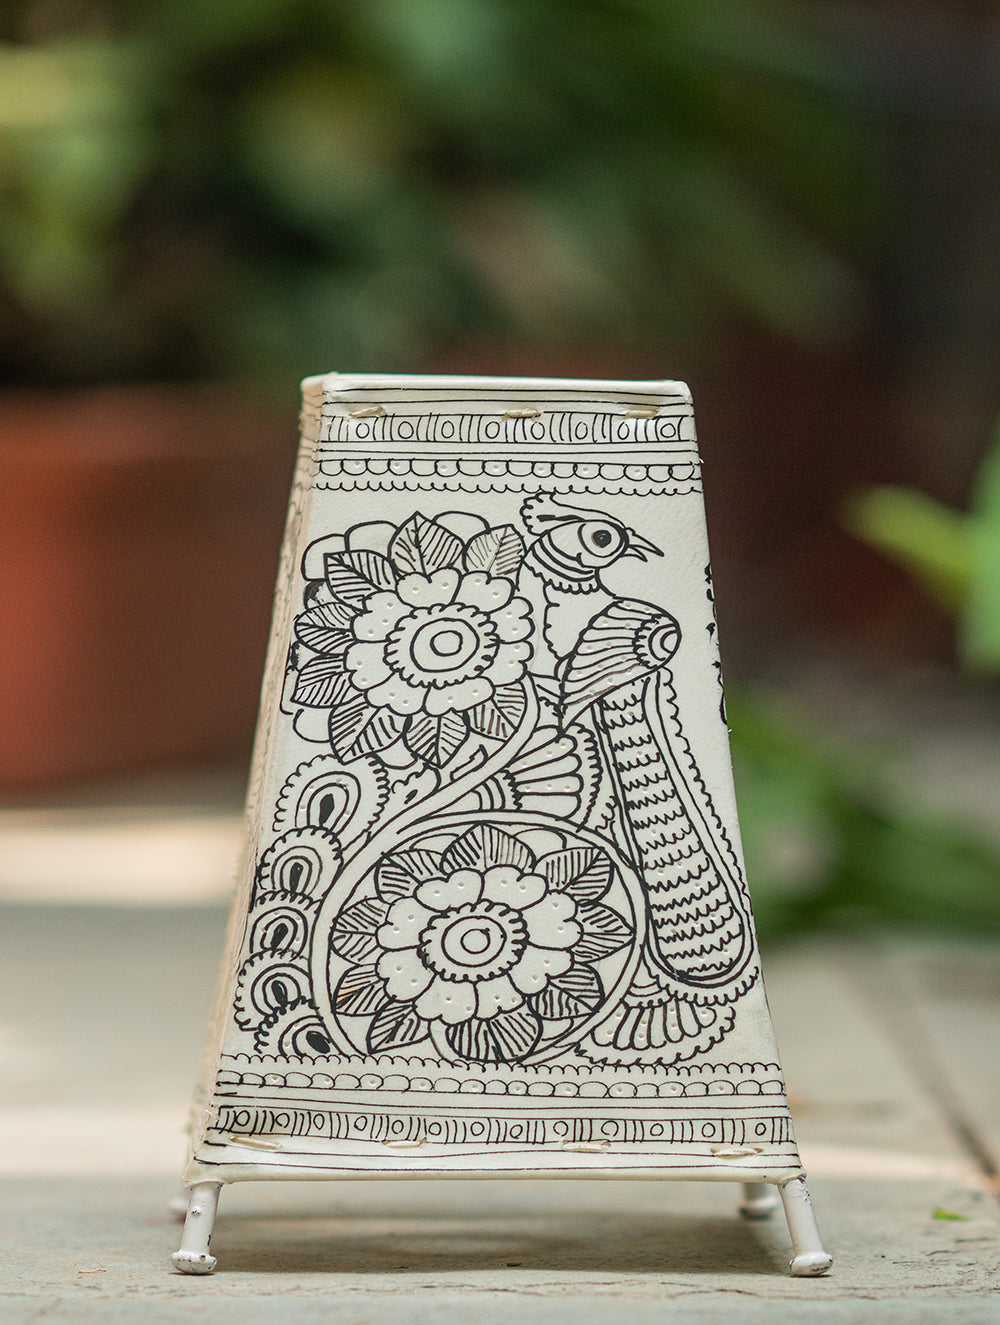 Load image into Gallery viewer, Andhra Leather Craft - Lamp Shade